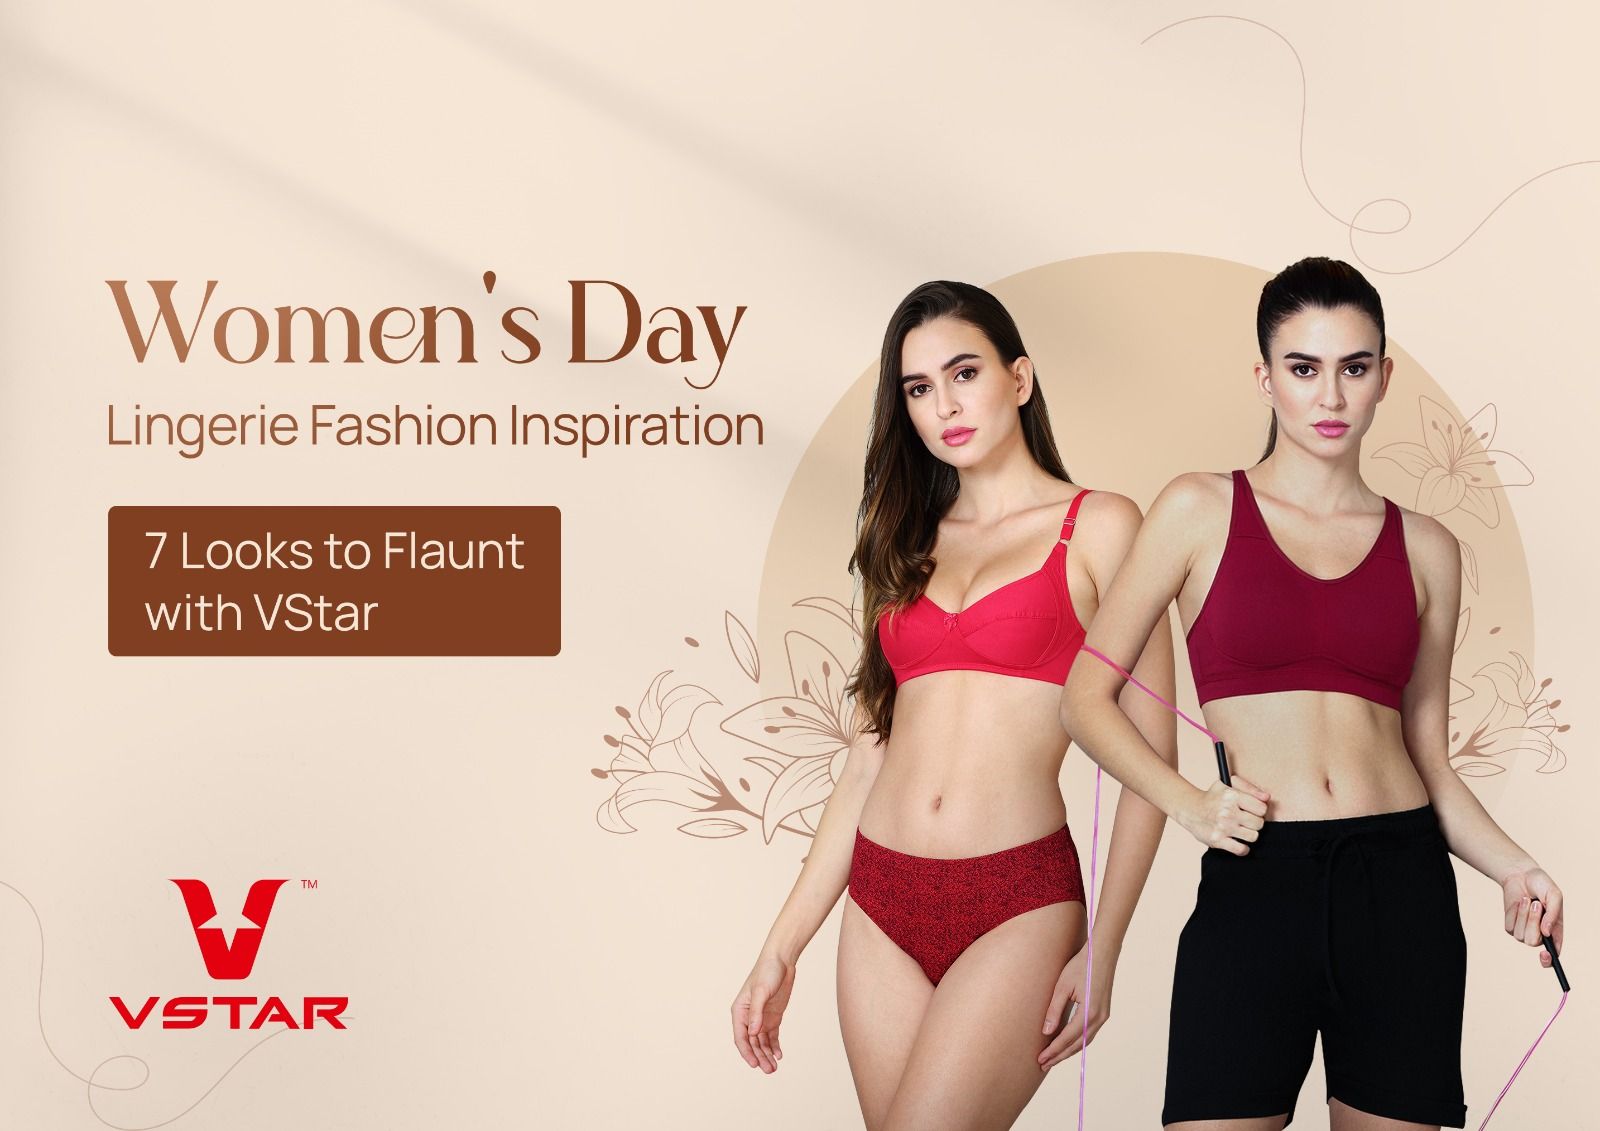 Women's Day Lingerie Fashion Inspiration: 7 Looks to Flaunt with VStar